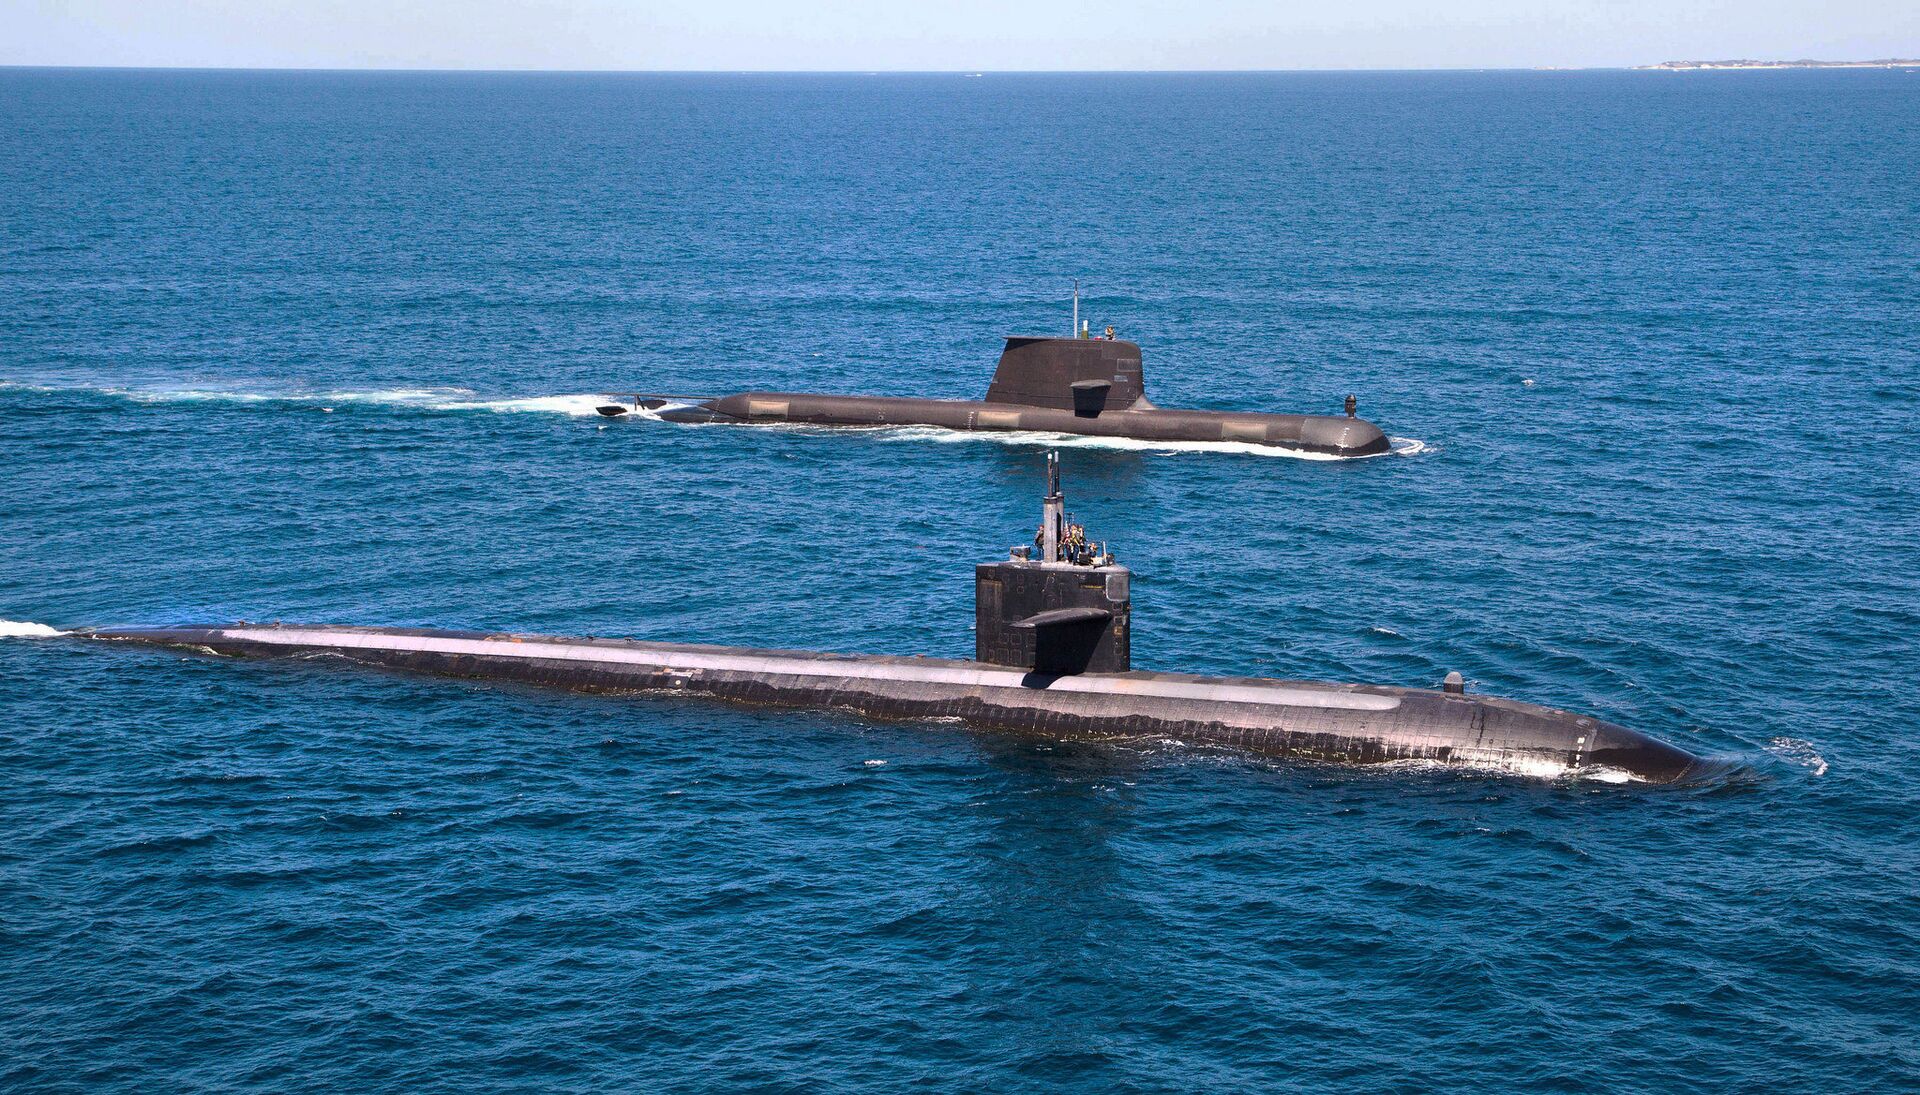 The U.S. Navy's Los Angeles-class fast attack submarine USS Albuquerque (SSN 706) and Royal Australian Navy Collins-class submarine HMAS Rankin (SSG 78) operate together in waters off Rottnest Island, Western Australia.  - Sputnik International, 1920, 19.09.2021